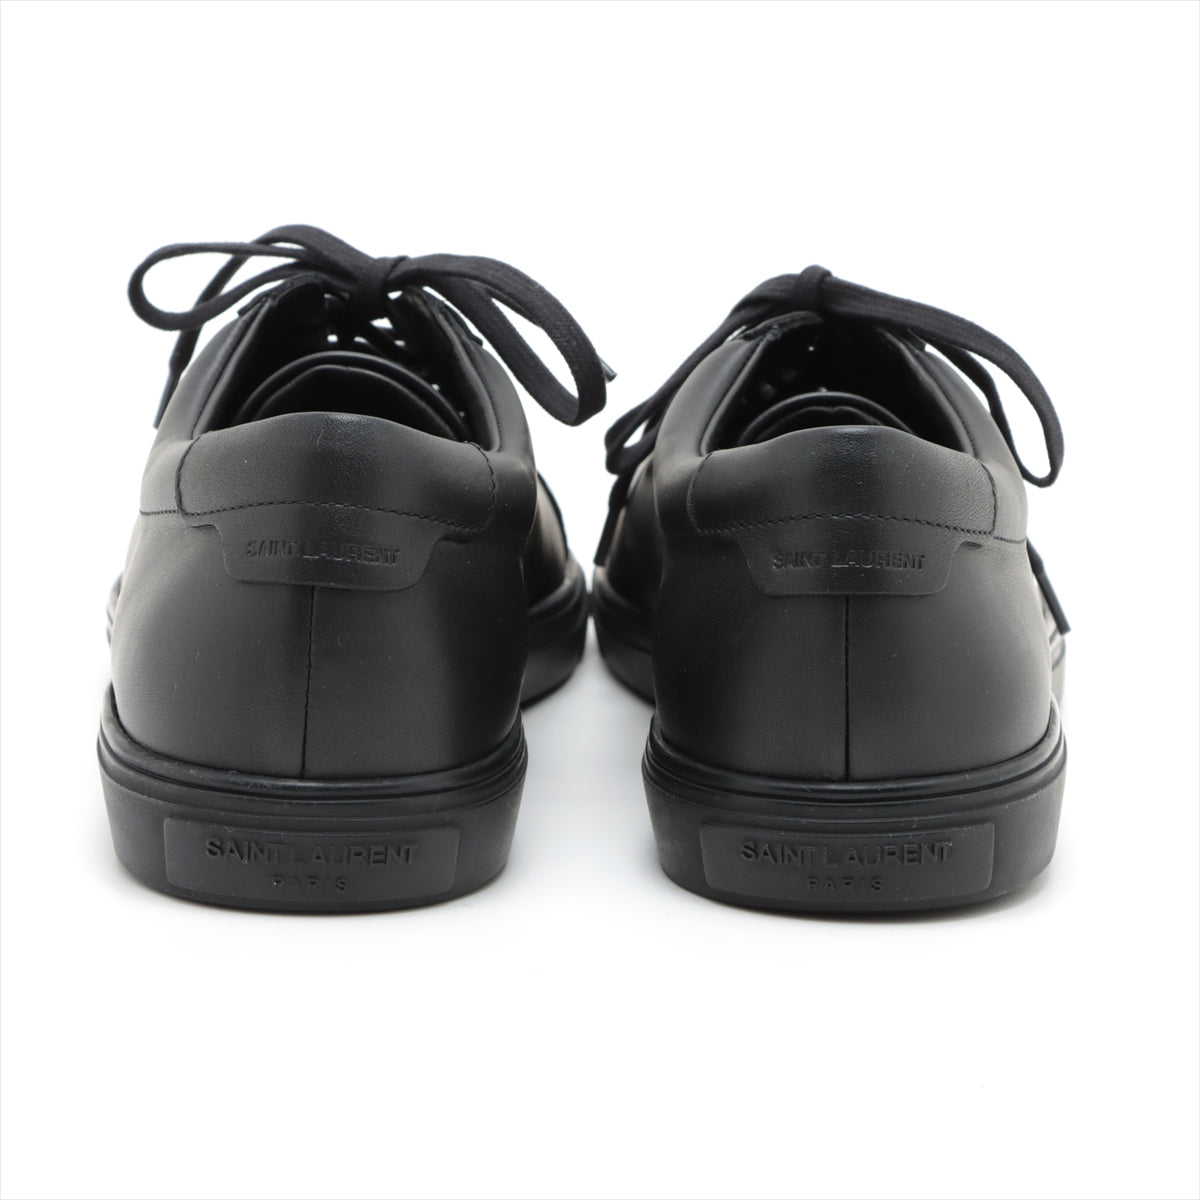 Saint Laurent Paris Leather Sneakers 46 Men's Black 606833 Is there a replacement string